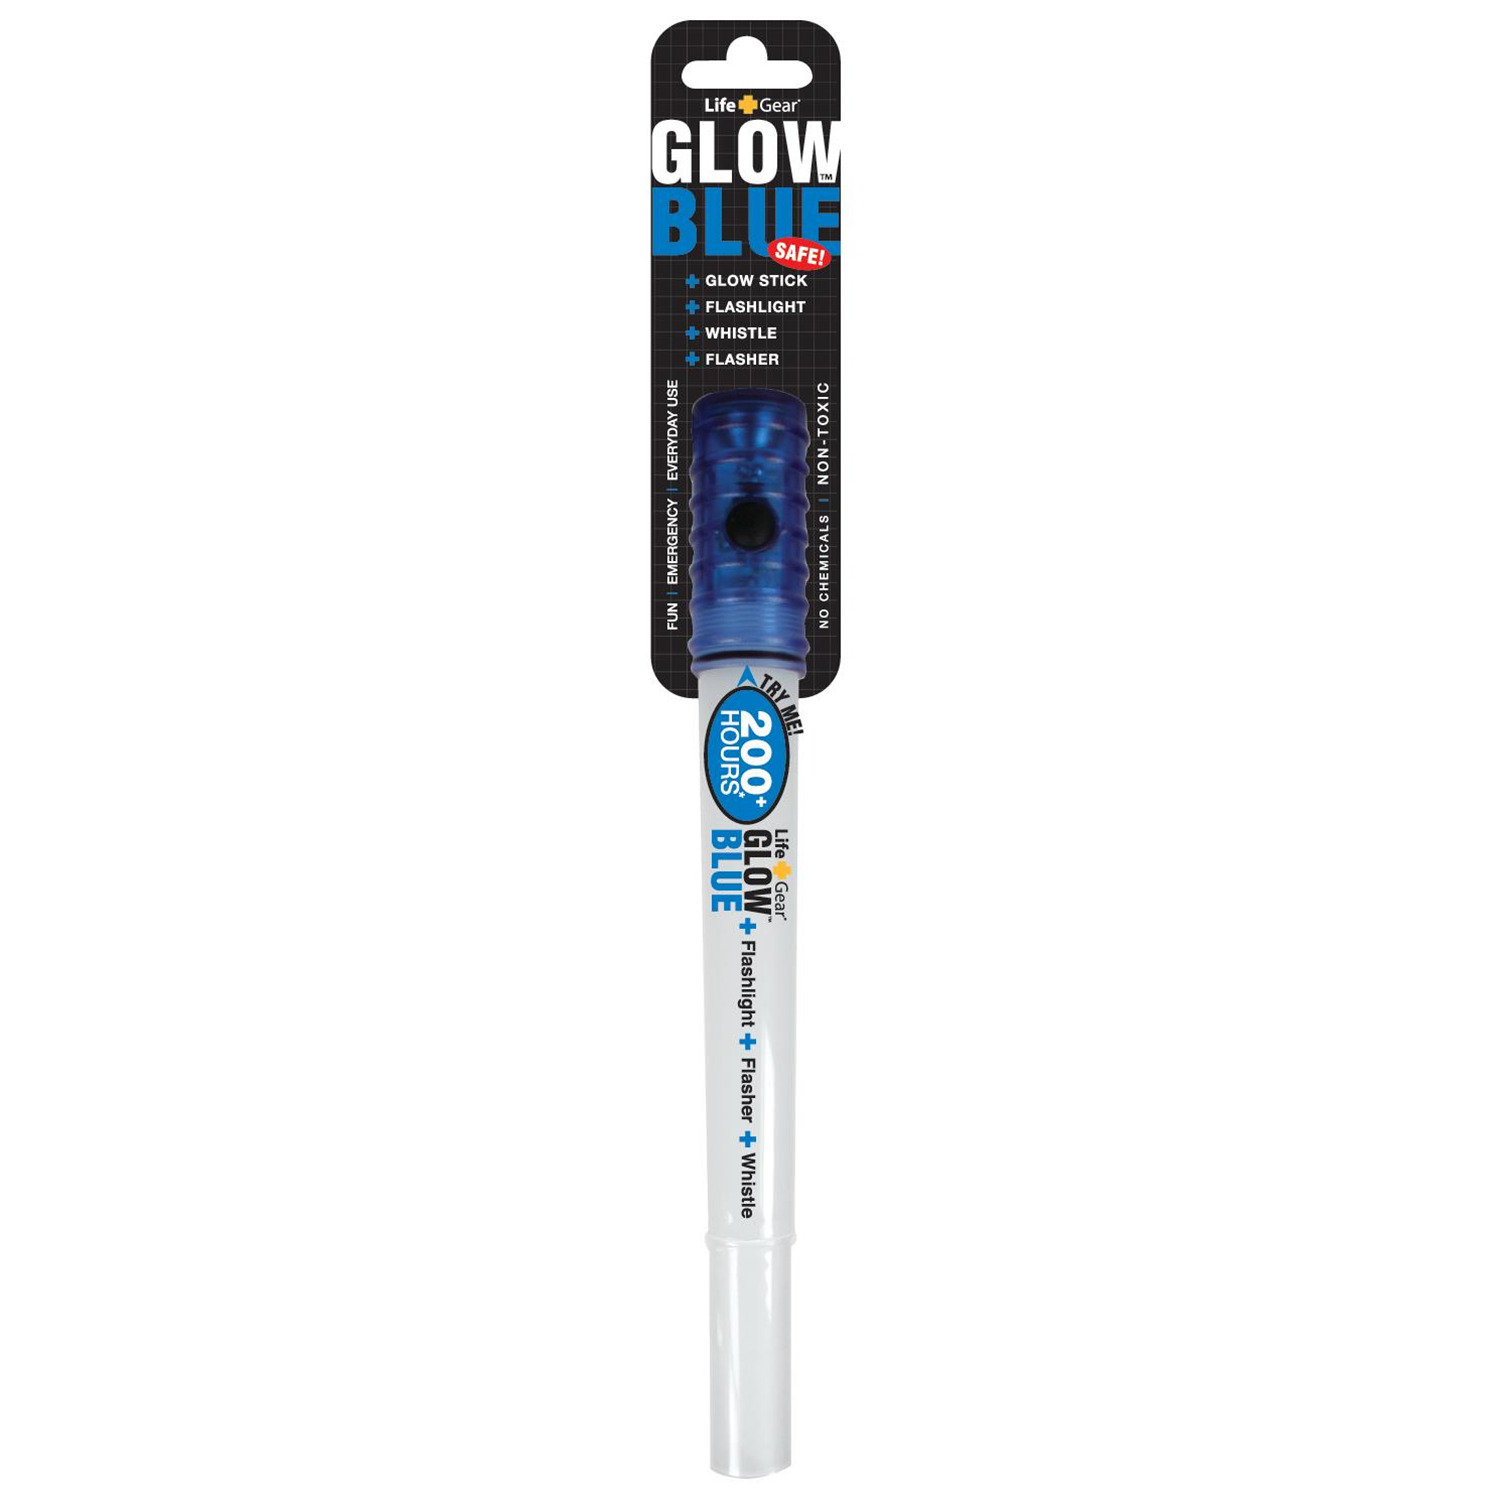 Life+Gear Glowstick in Blue - image 2 of 8